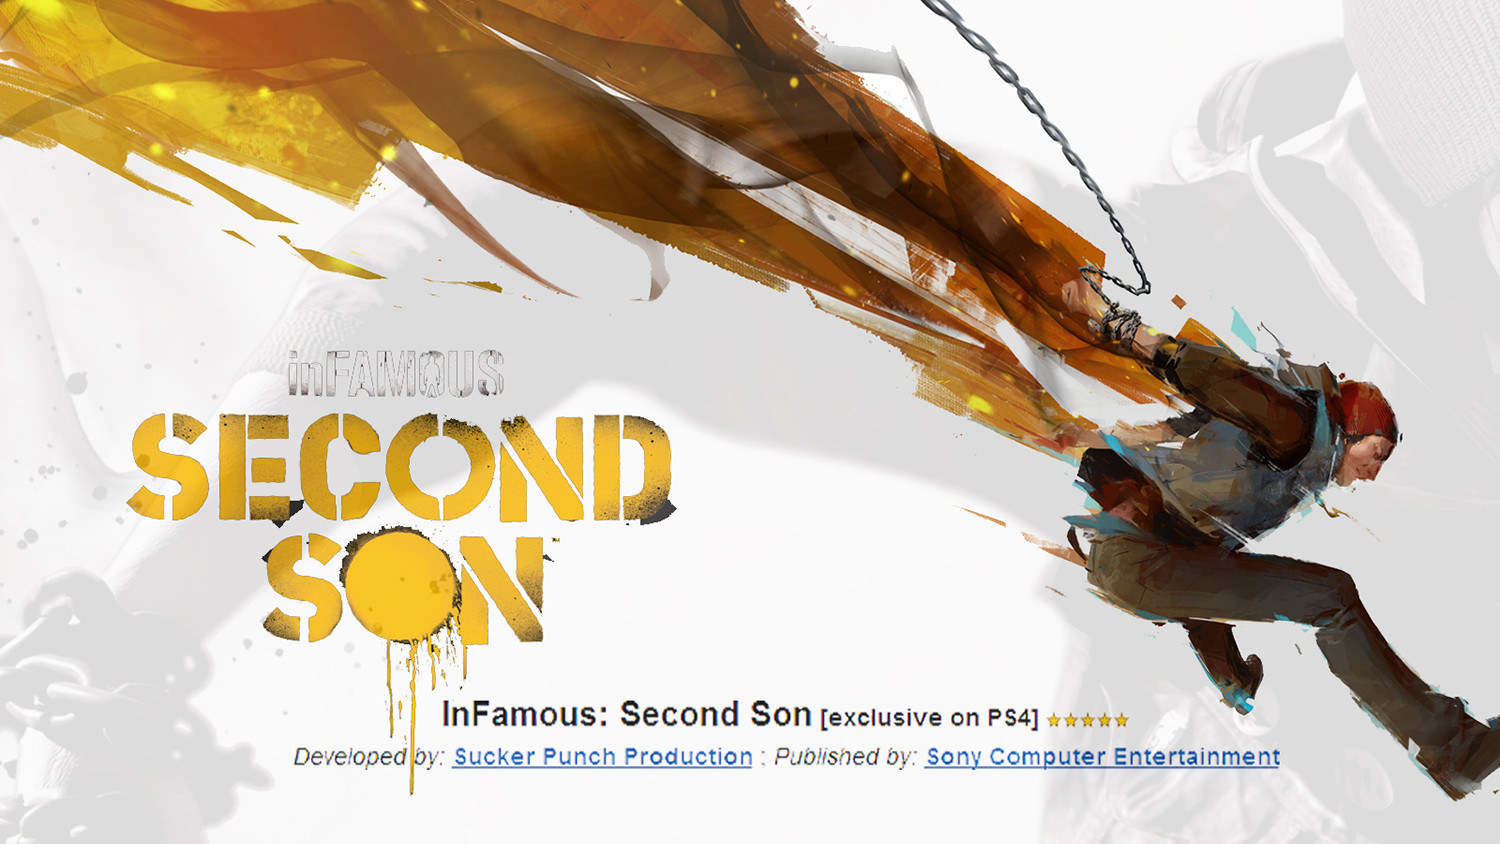 InFAMOUS: Second Son (PS4) by Sucker Punch Production and SCEA